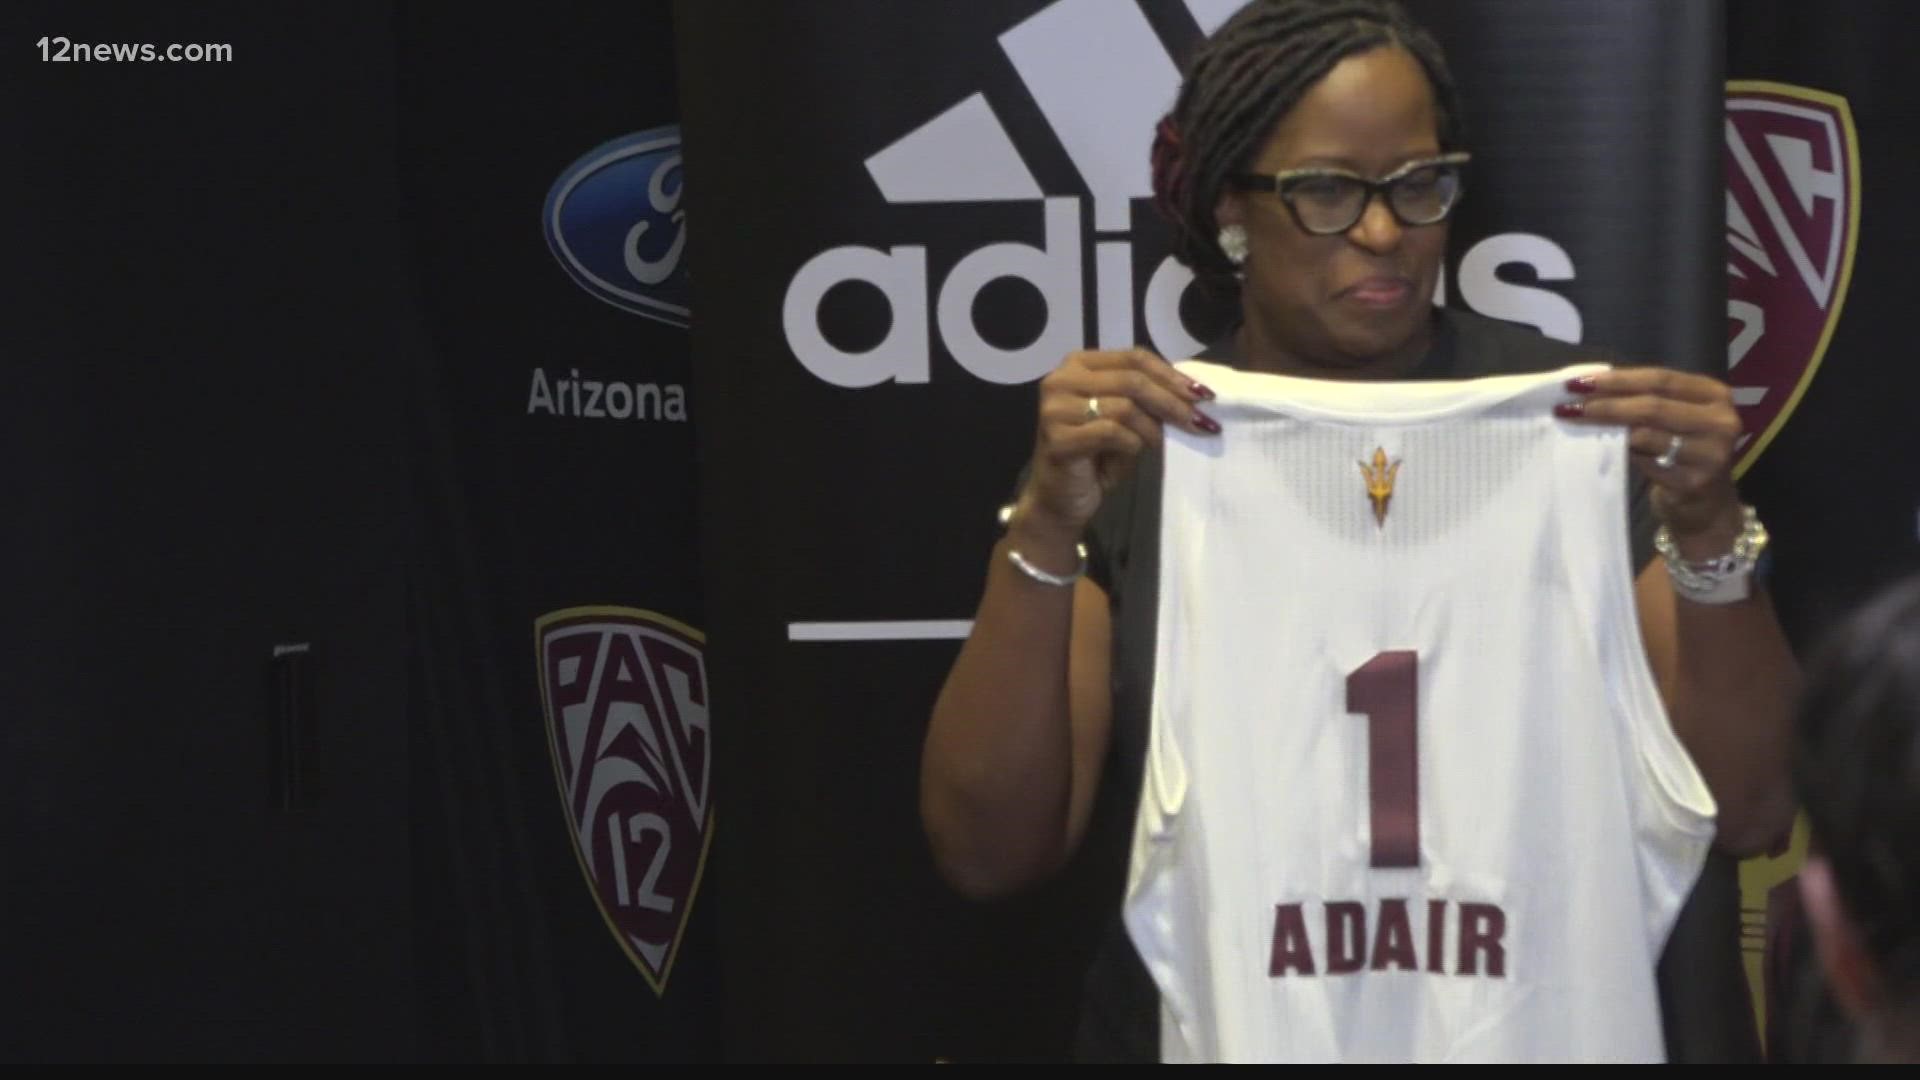 The Sun Devils have a new head coach for the women's basketball team, Natasha Adair or Coach A. She plans to build a winning team as she did in Delaware.